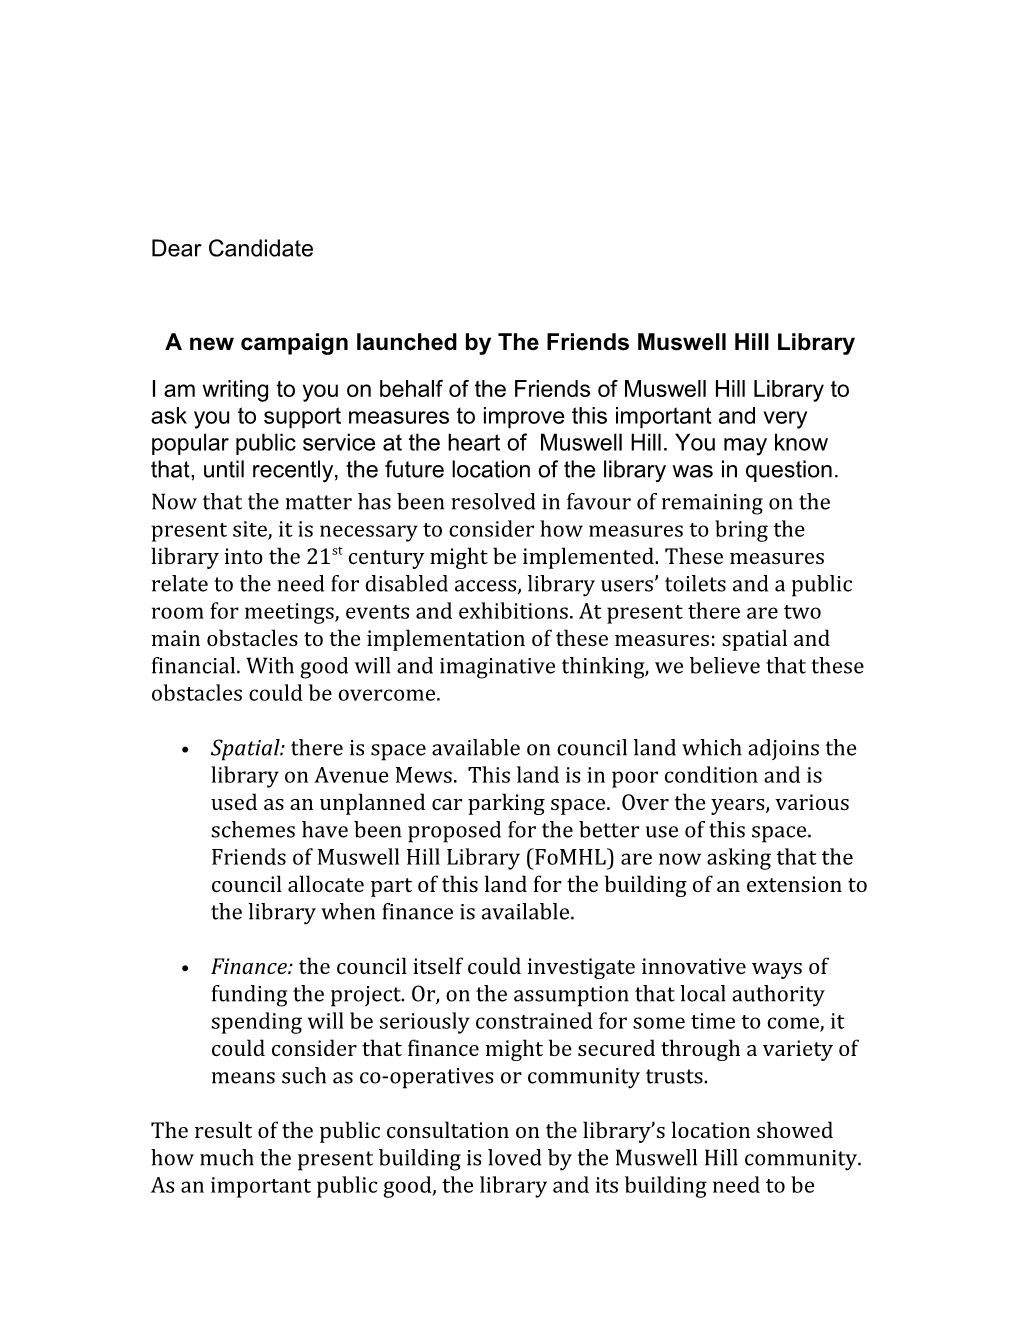 A New Campaign Launched by the Friends Muswell Hill Library